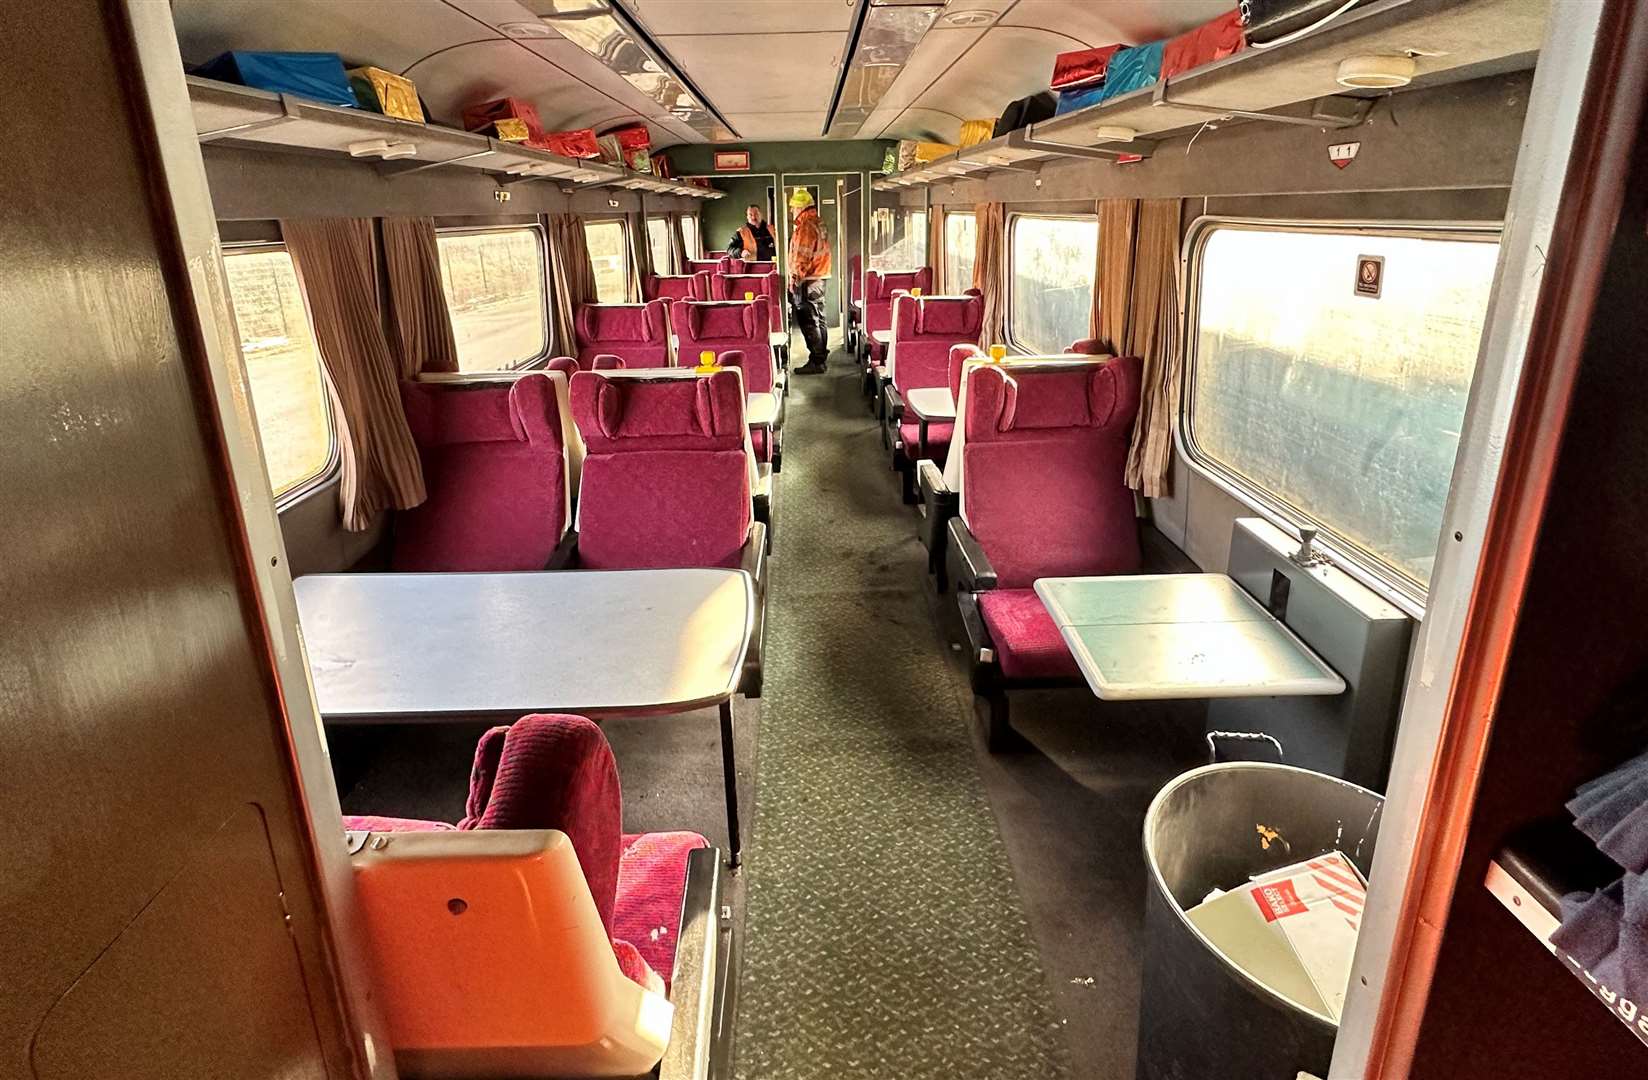 The train carriage which is to be renovated as a cafe at Five Acre Wood School in Maidstone